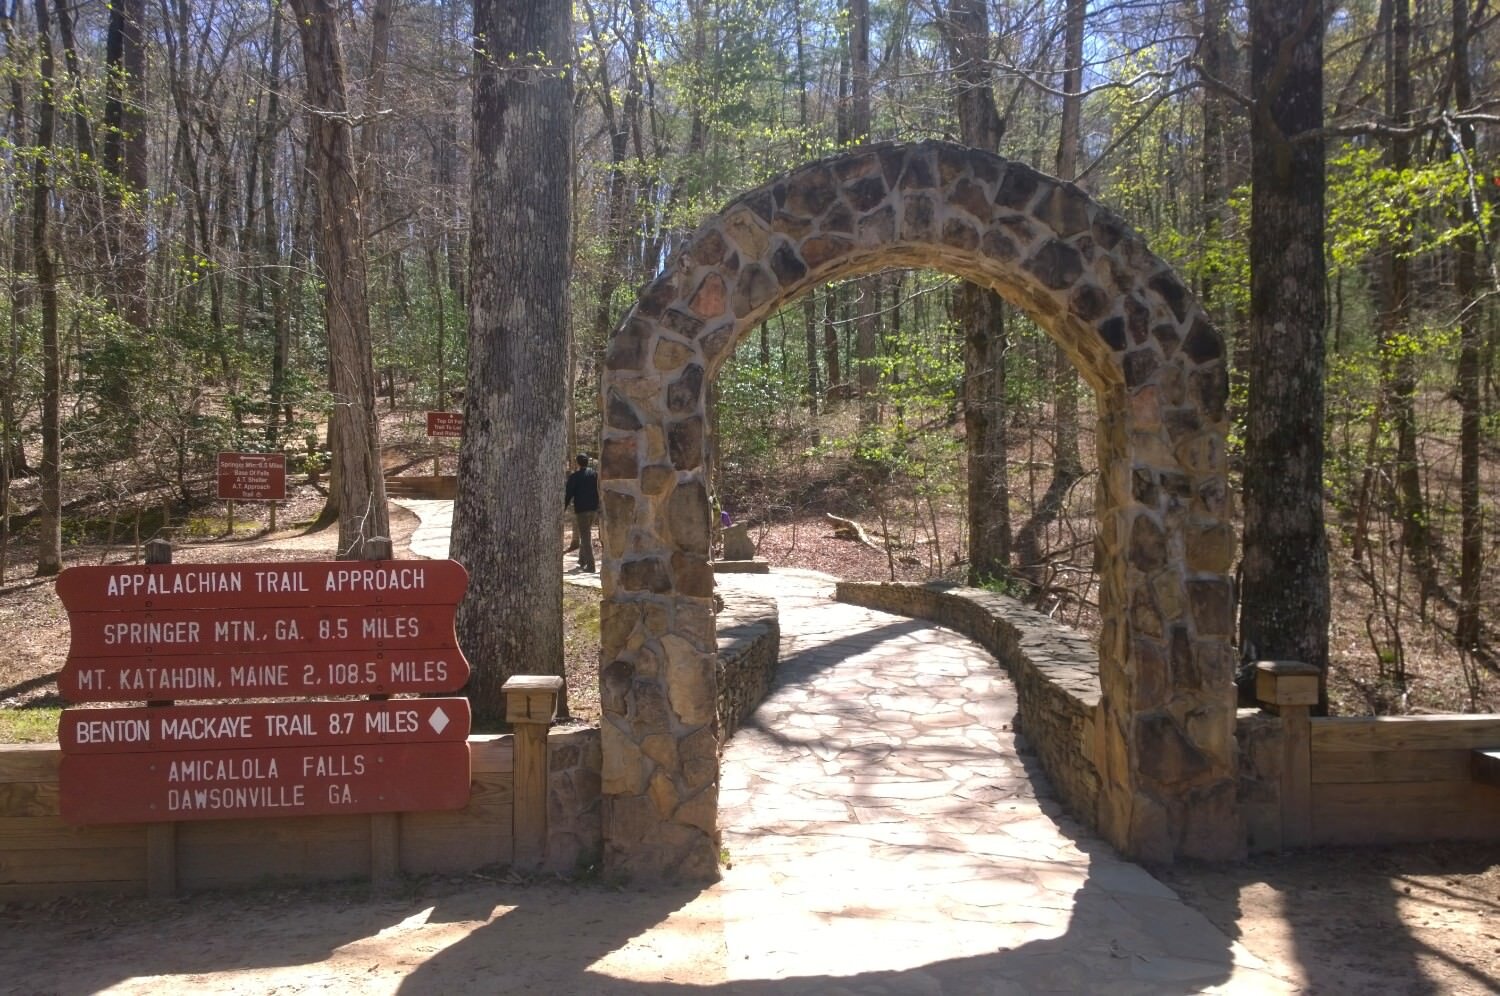 famous arch at the start of the Appalachian trail approach.